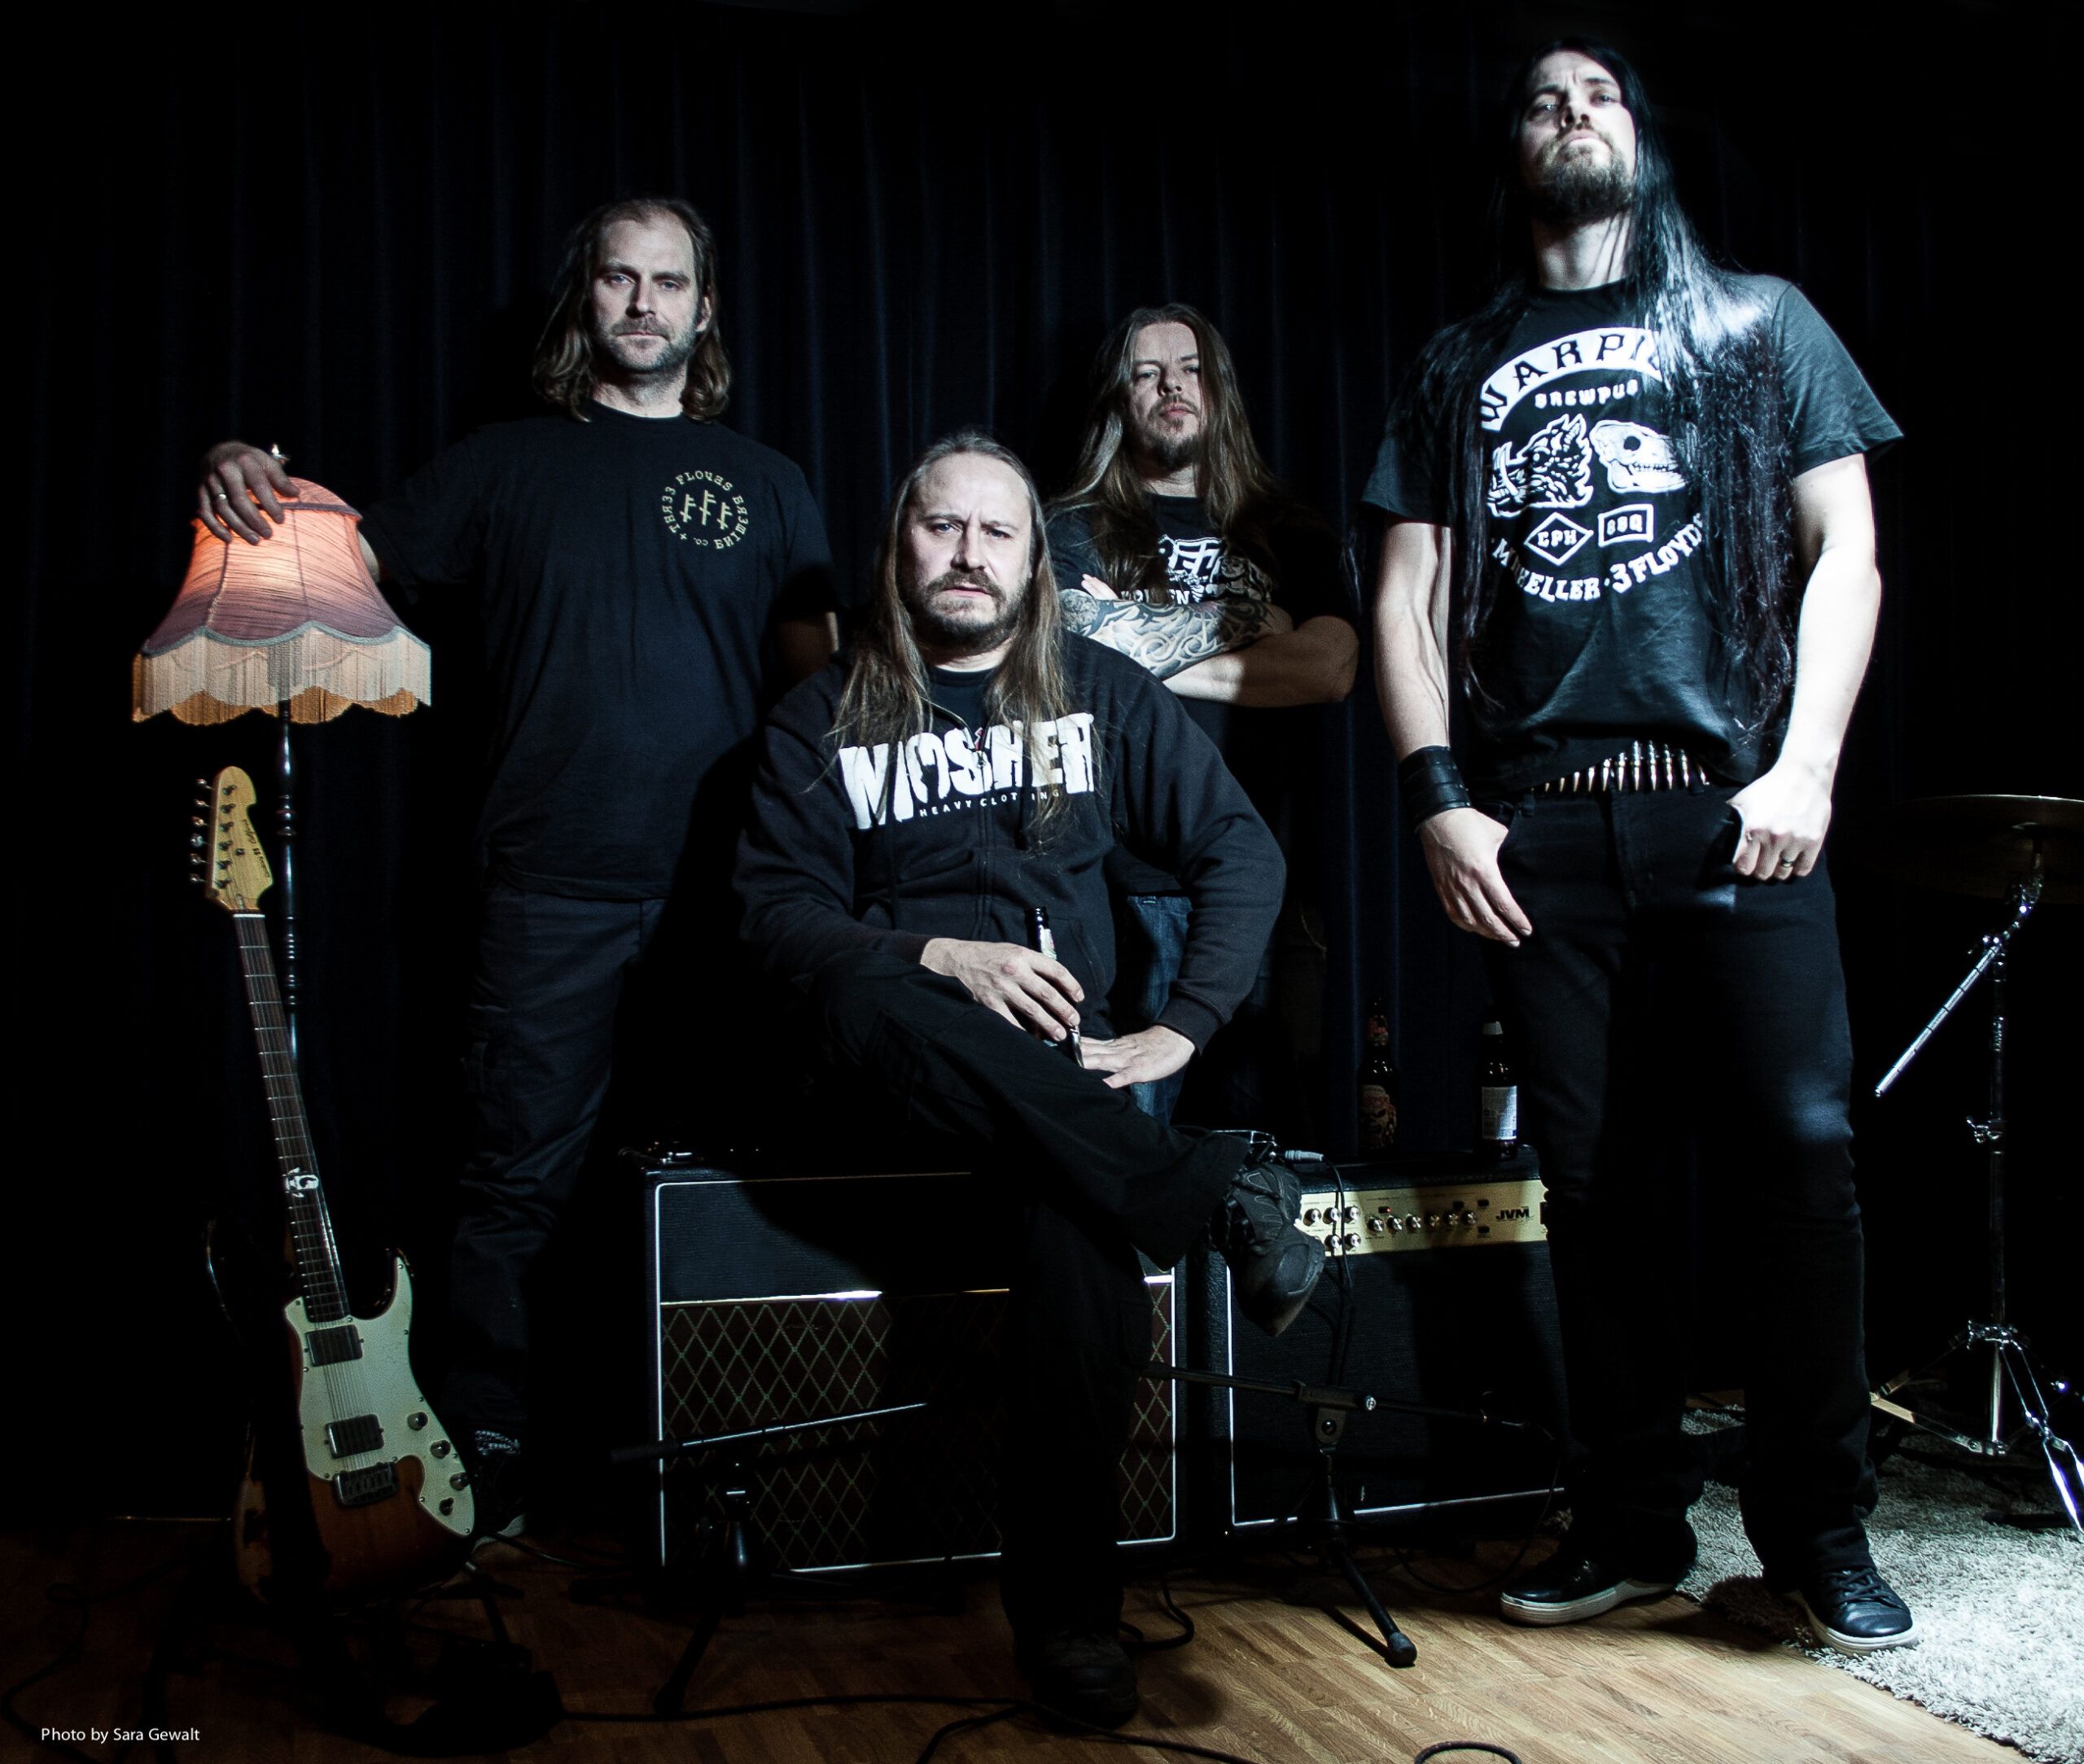 Entombed A.D.: Neues Album kommt Anfang 2018